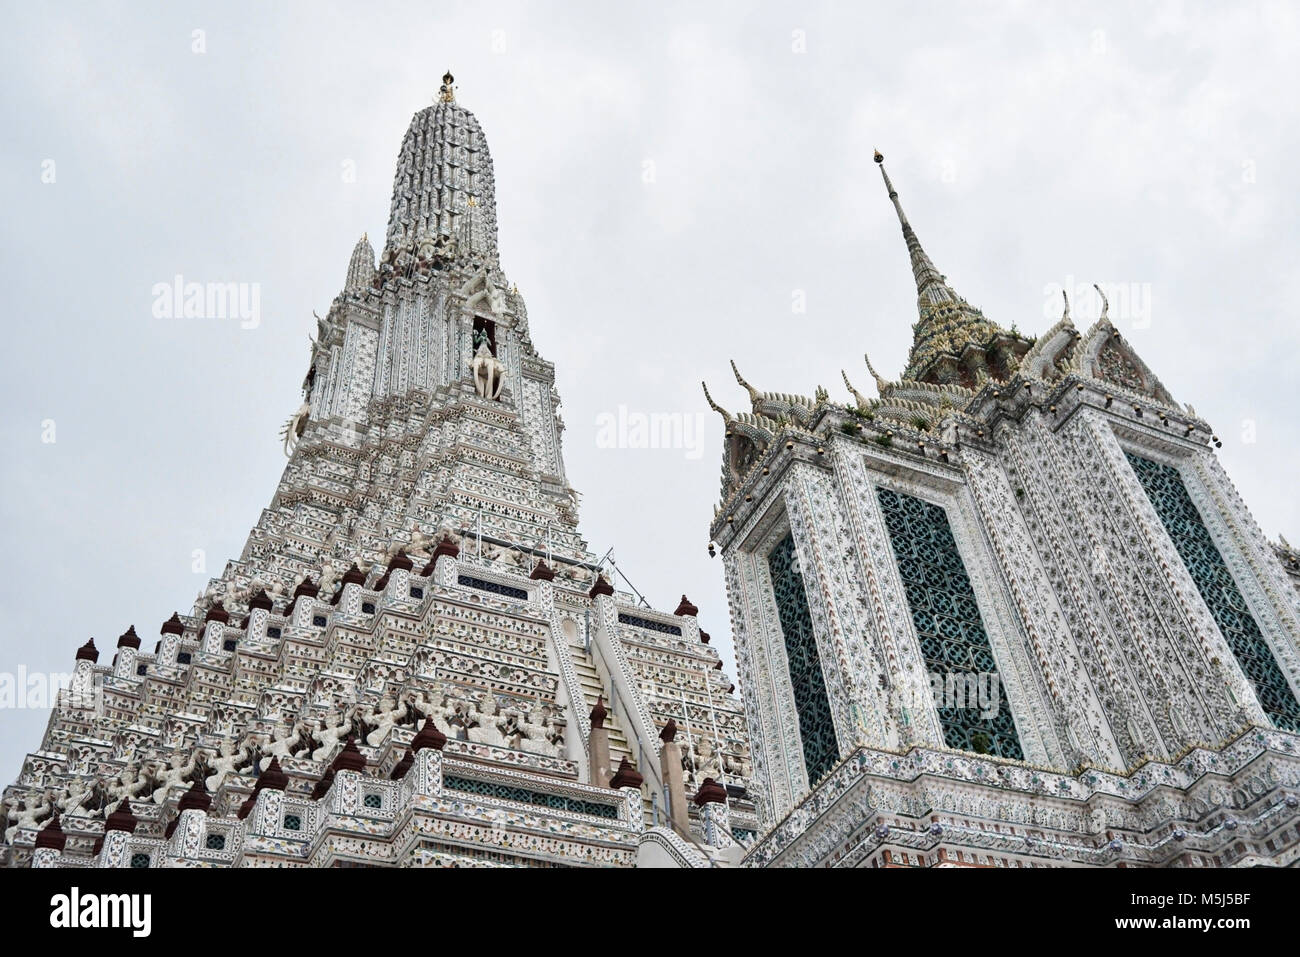 Wat Arun buddhist temple view in a cloudy day. Bangkok, Thailand. Stock Photo